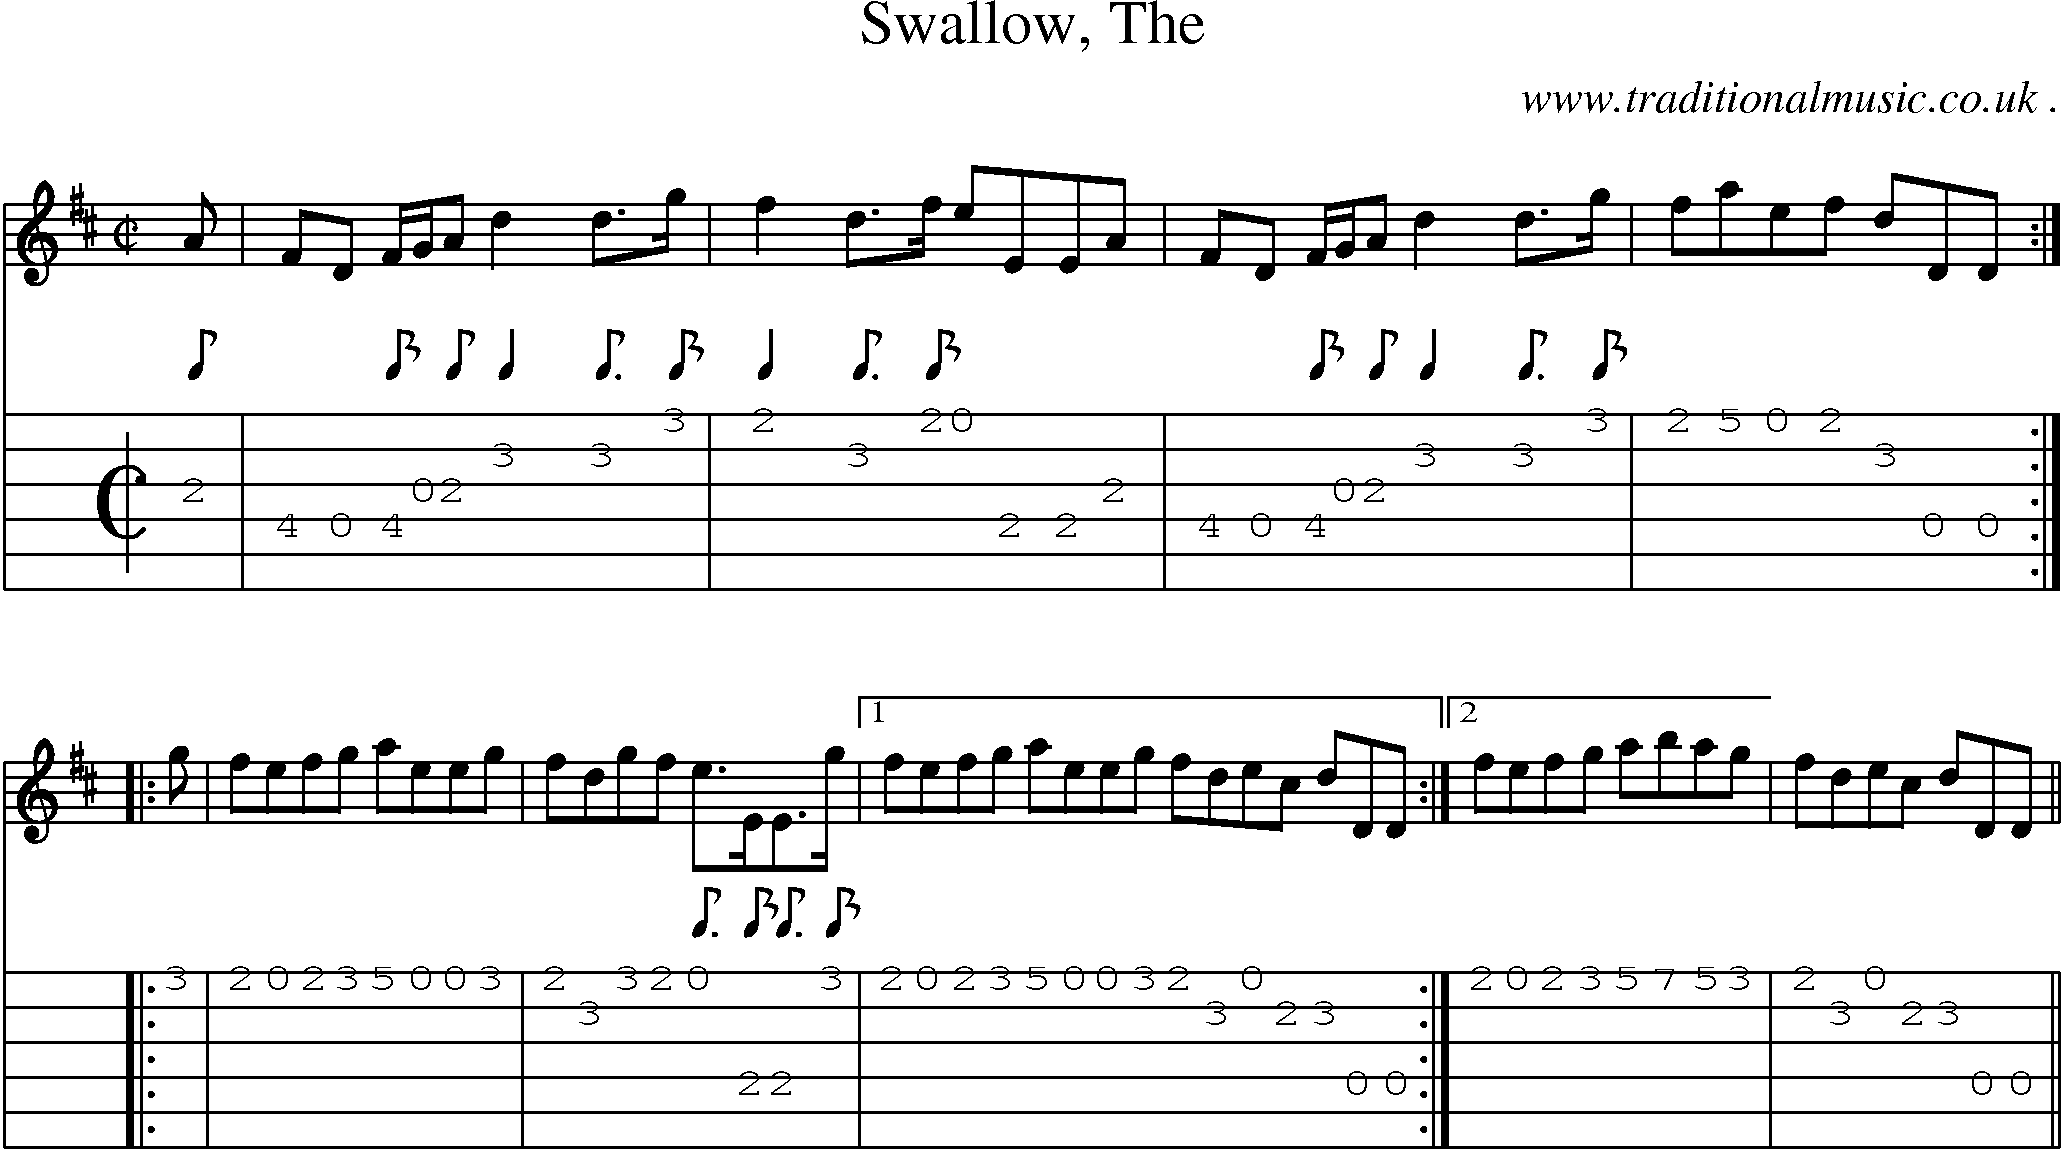 Sheet-music  score, Chords and Guitar Tabs for Swallow The